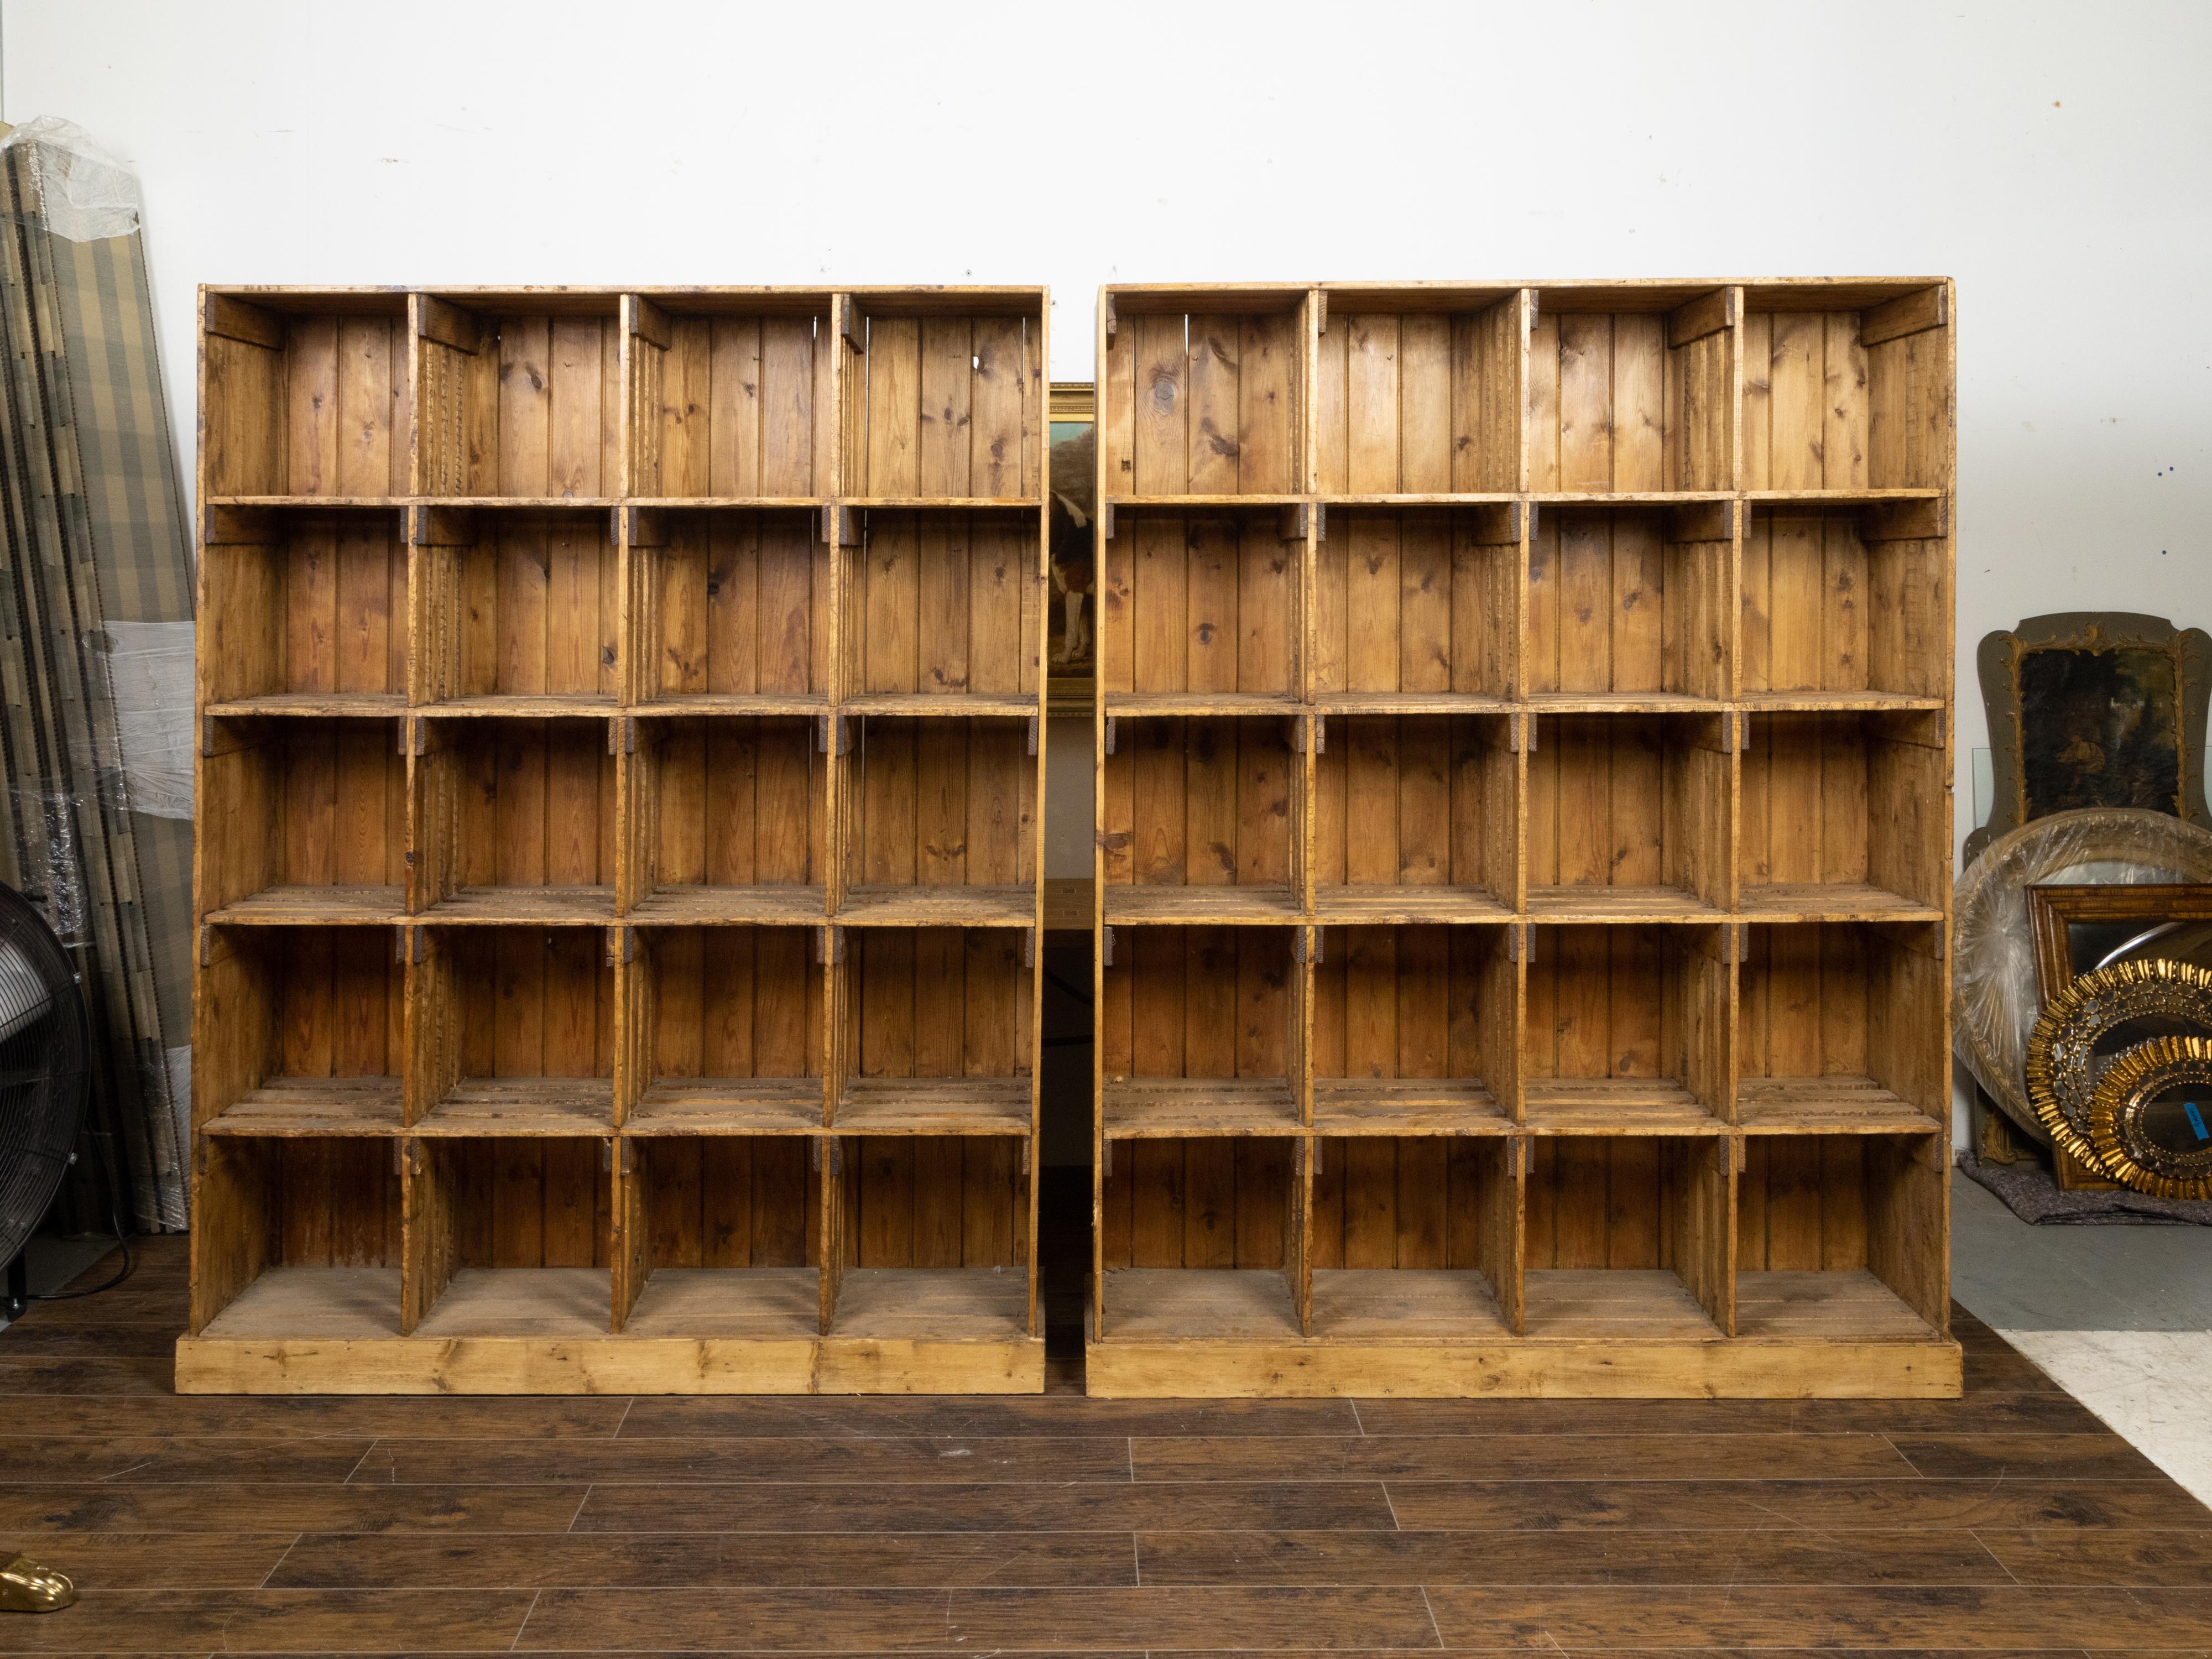 Two vintage English raw wood pine display or storage cabinets from the mid 20th century, with twenty cubby holes each and nicely weathered appearance. They are priced and sold individually $5,500 each. Created in England during the Midcentury